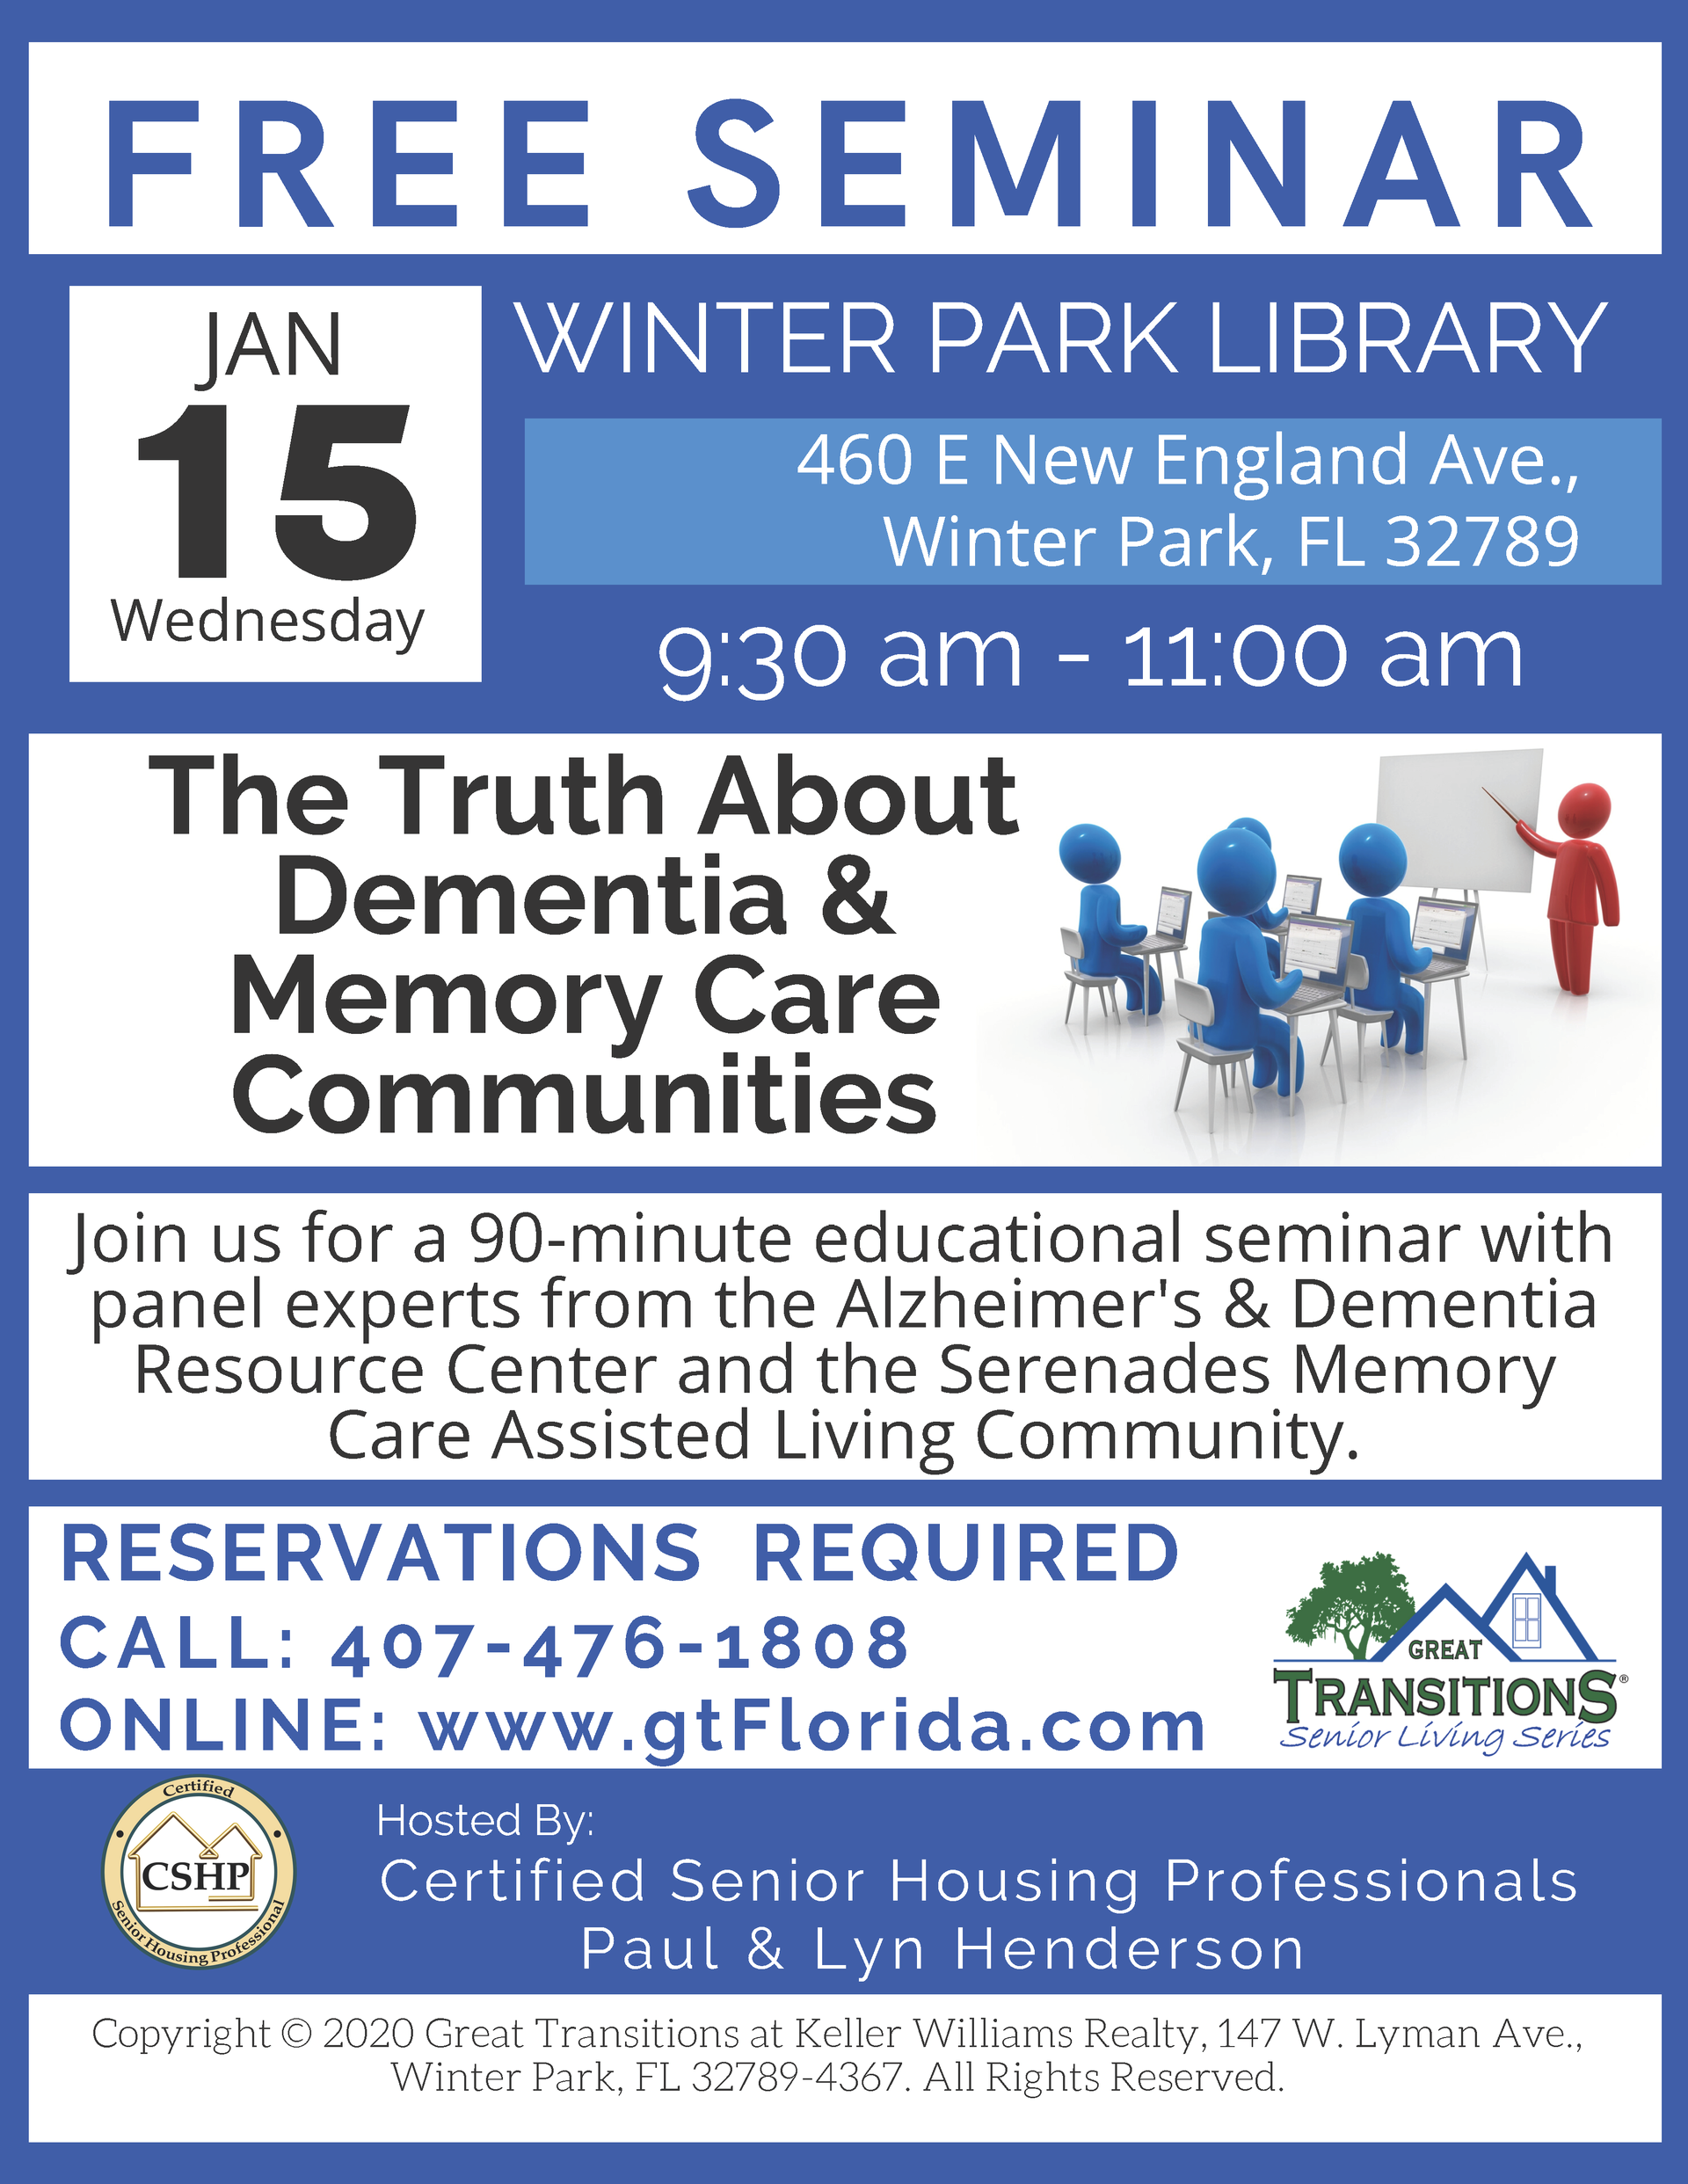 The Truth About Dementia & Memory Care Communities